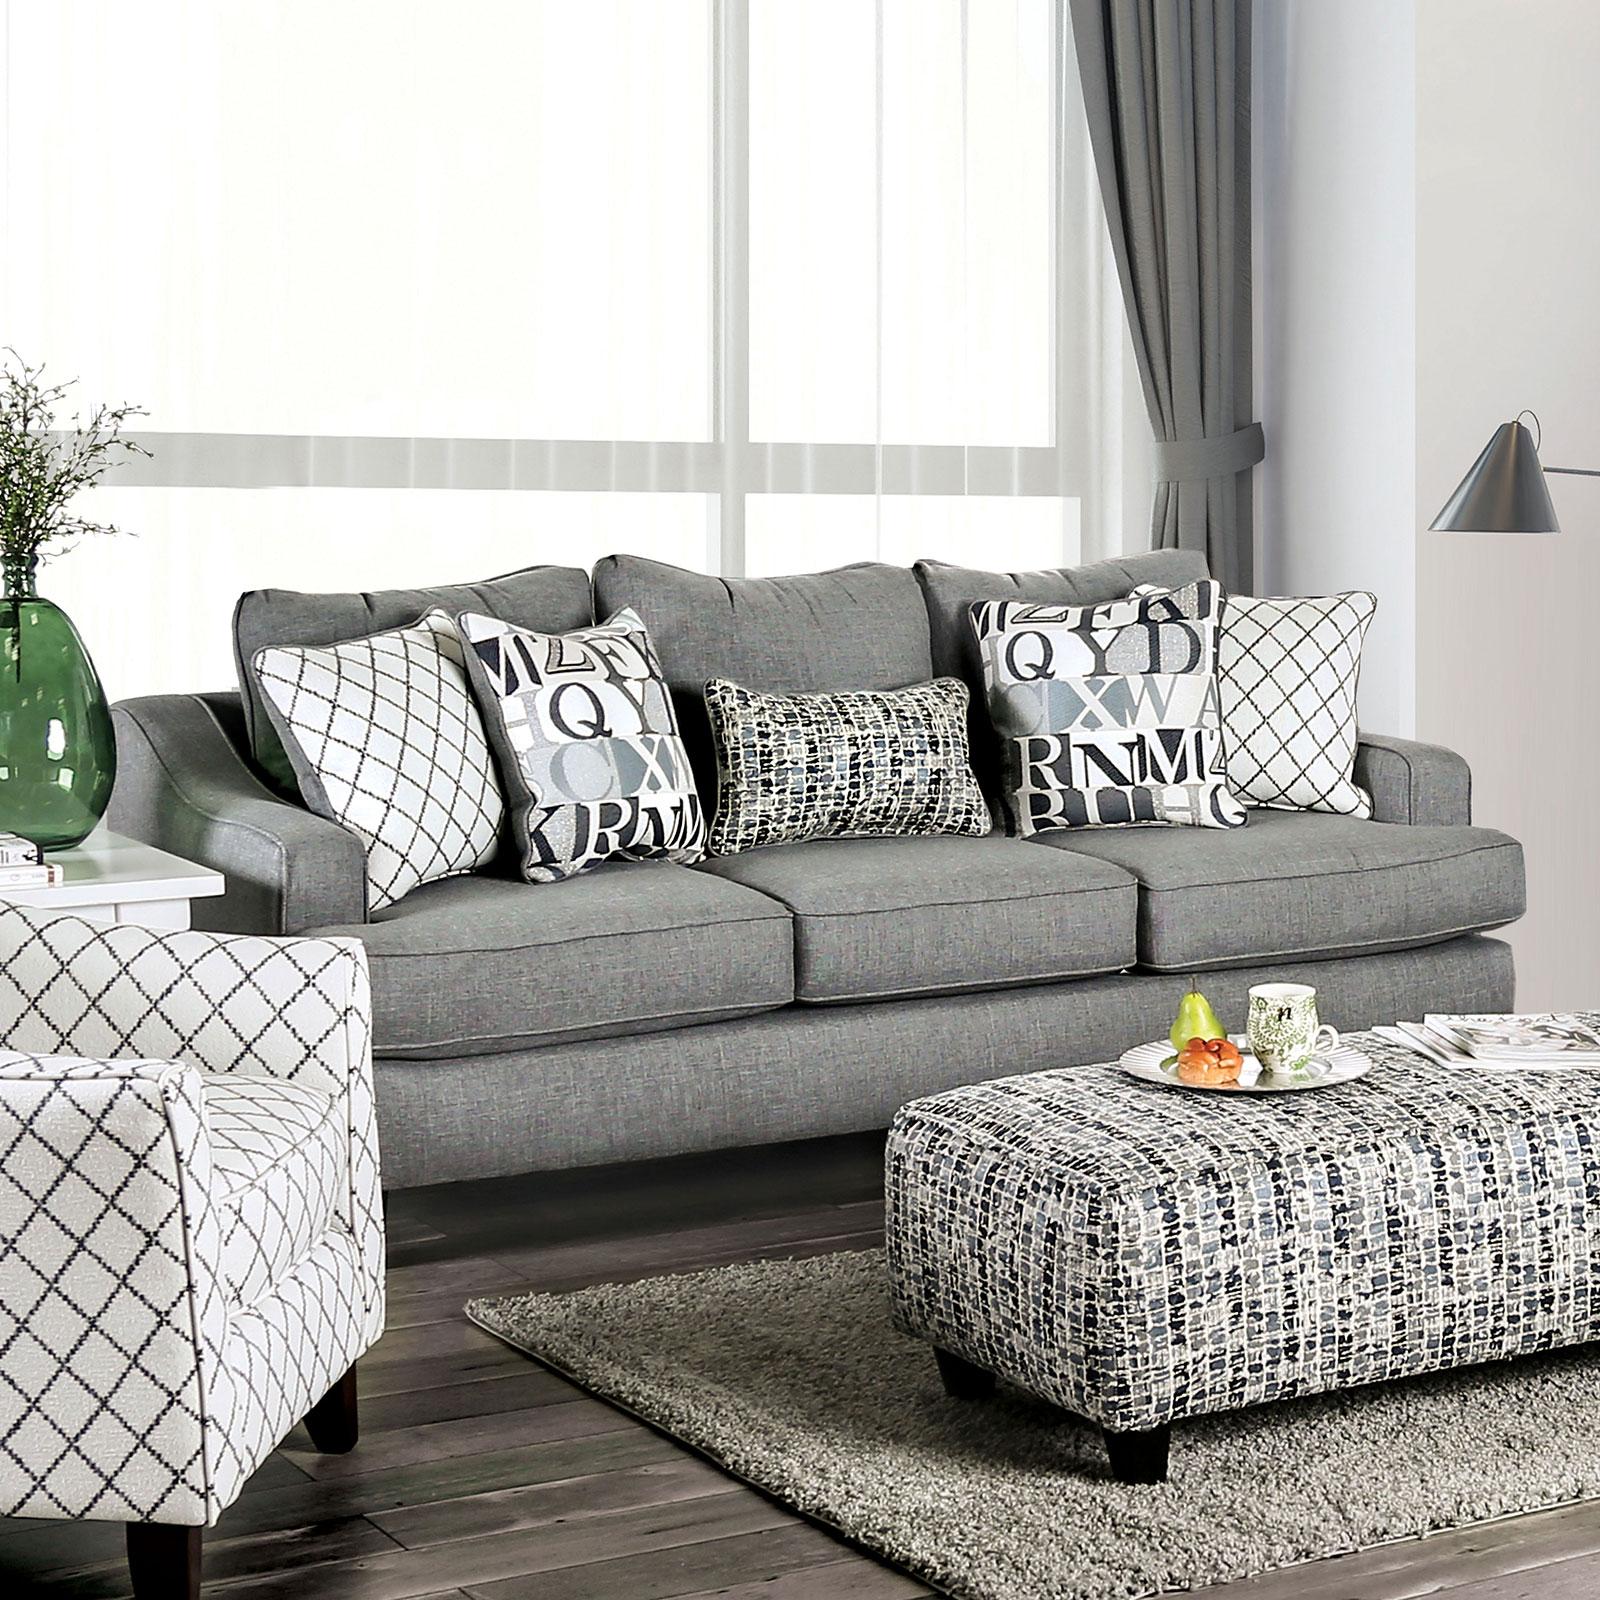 Transitional Sofa VERNE SM8330-SF SM8330-SF in Gray Fabric